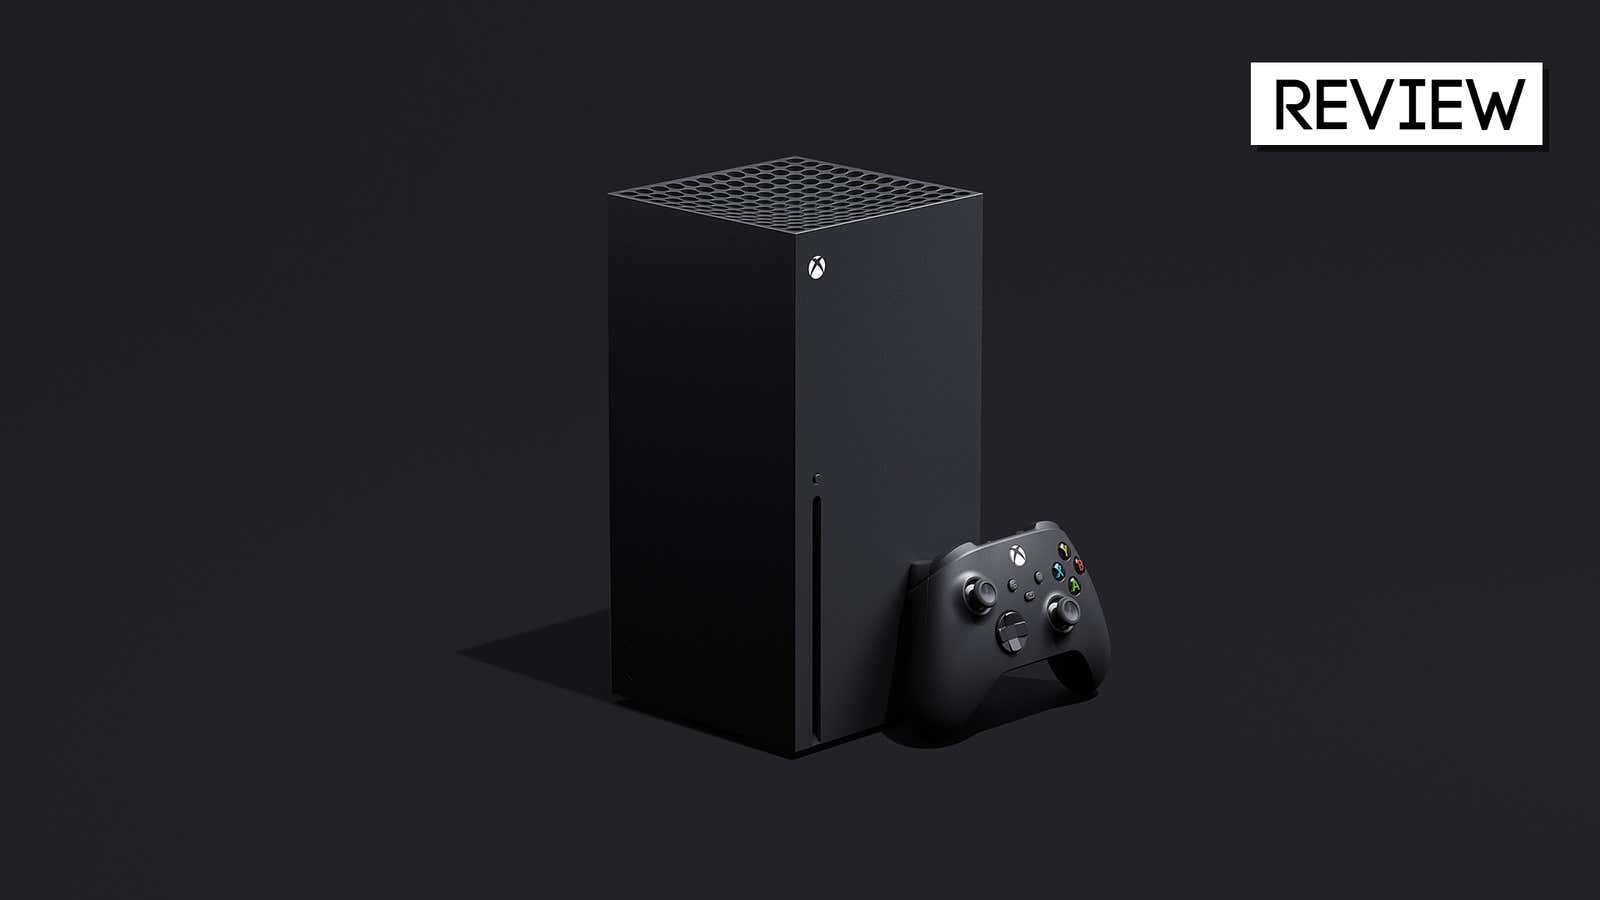 Microsoft Xbox Series X quick review: More than just a powerful